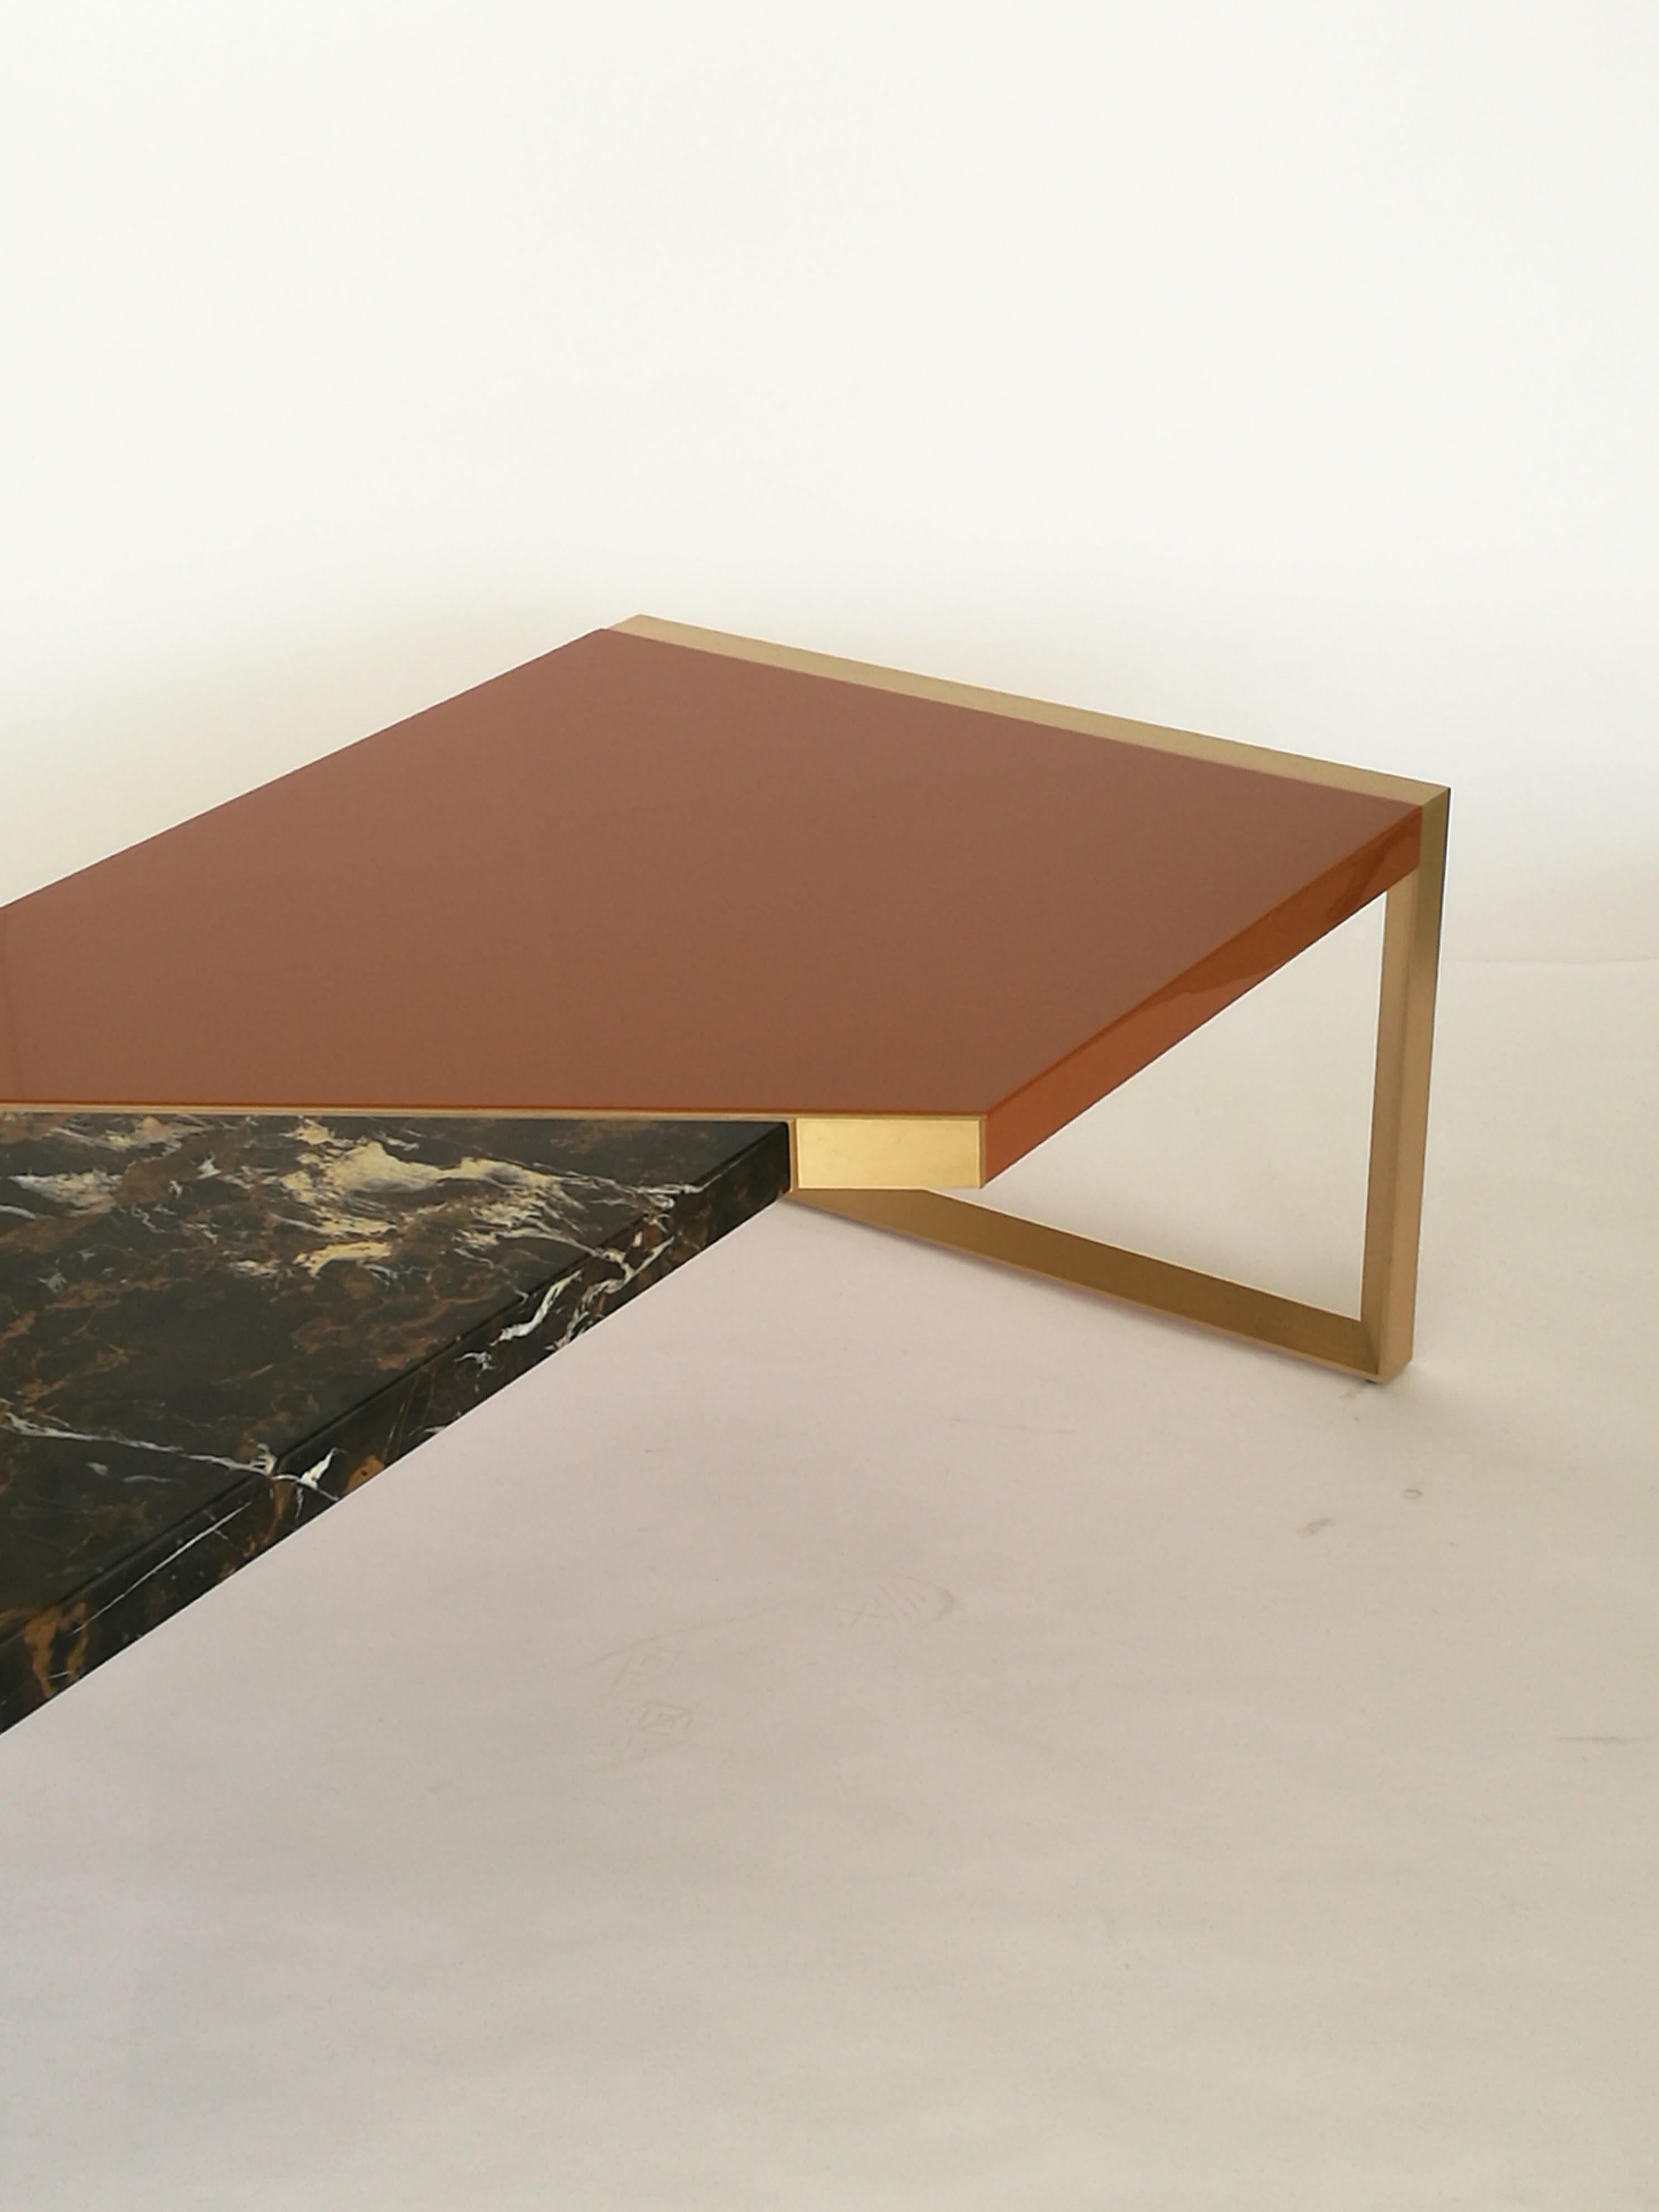 Trapeze coffee table by Hagit Pincovici

Materials: Lacquered wood, black and gold marble, brass

Handmade in Italy.